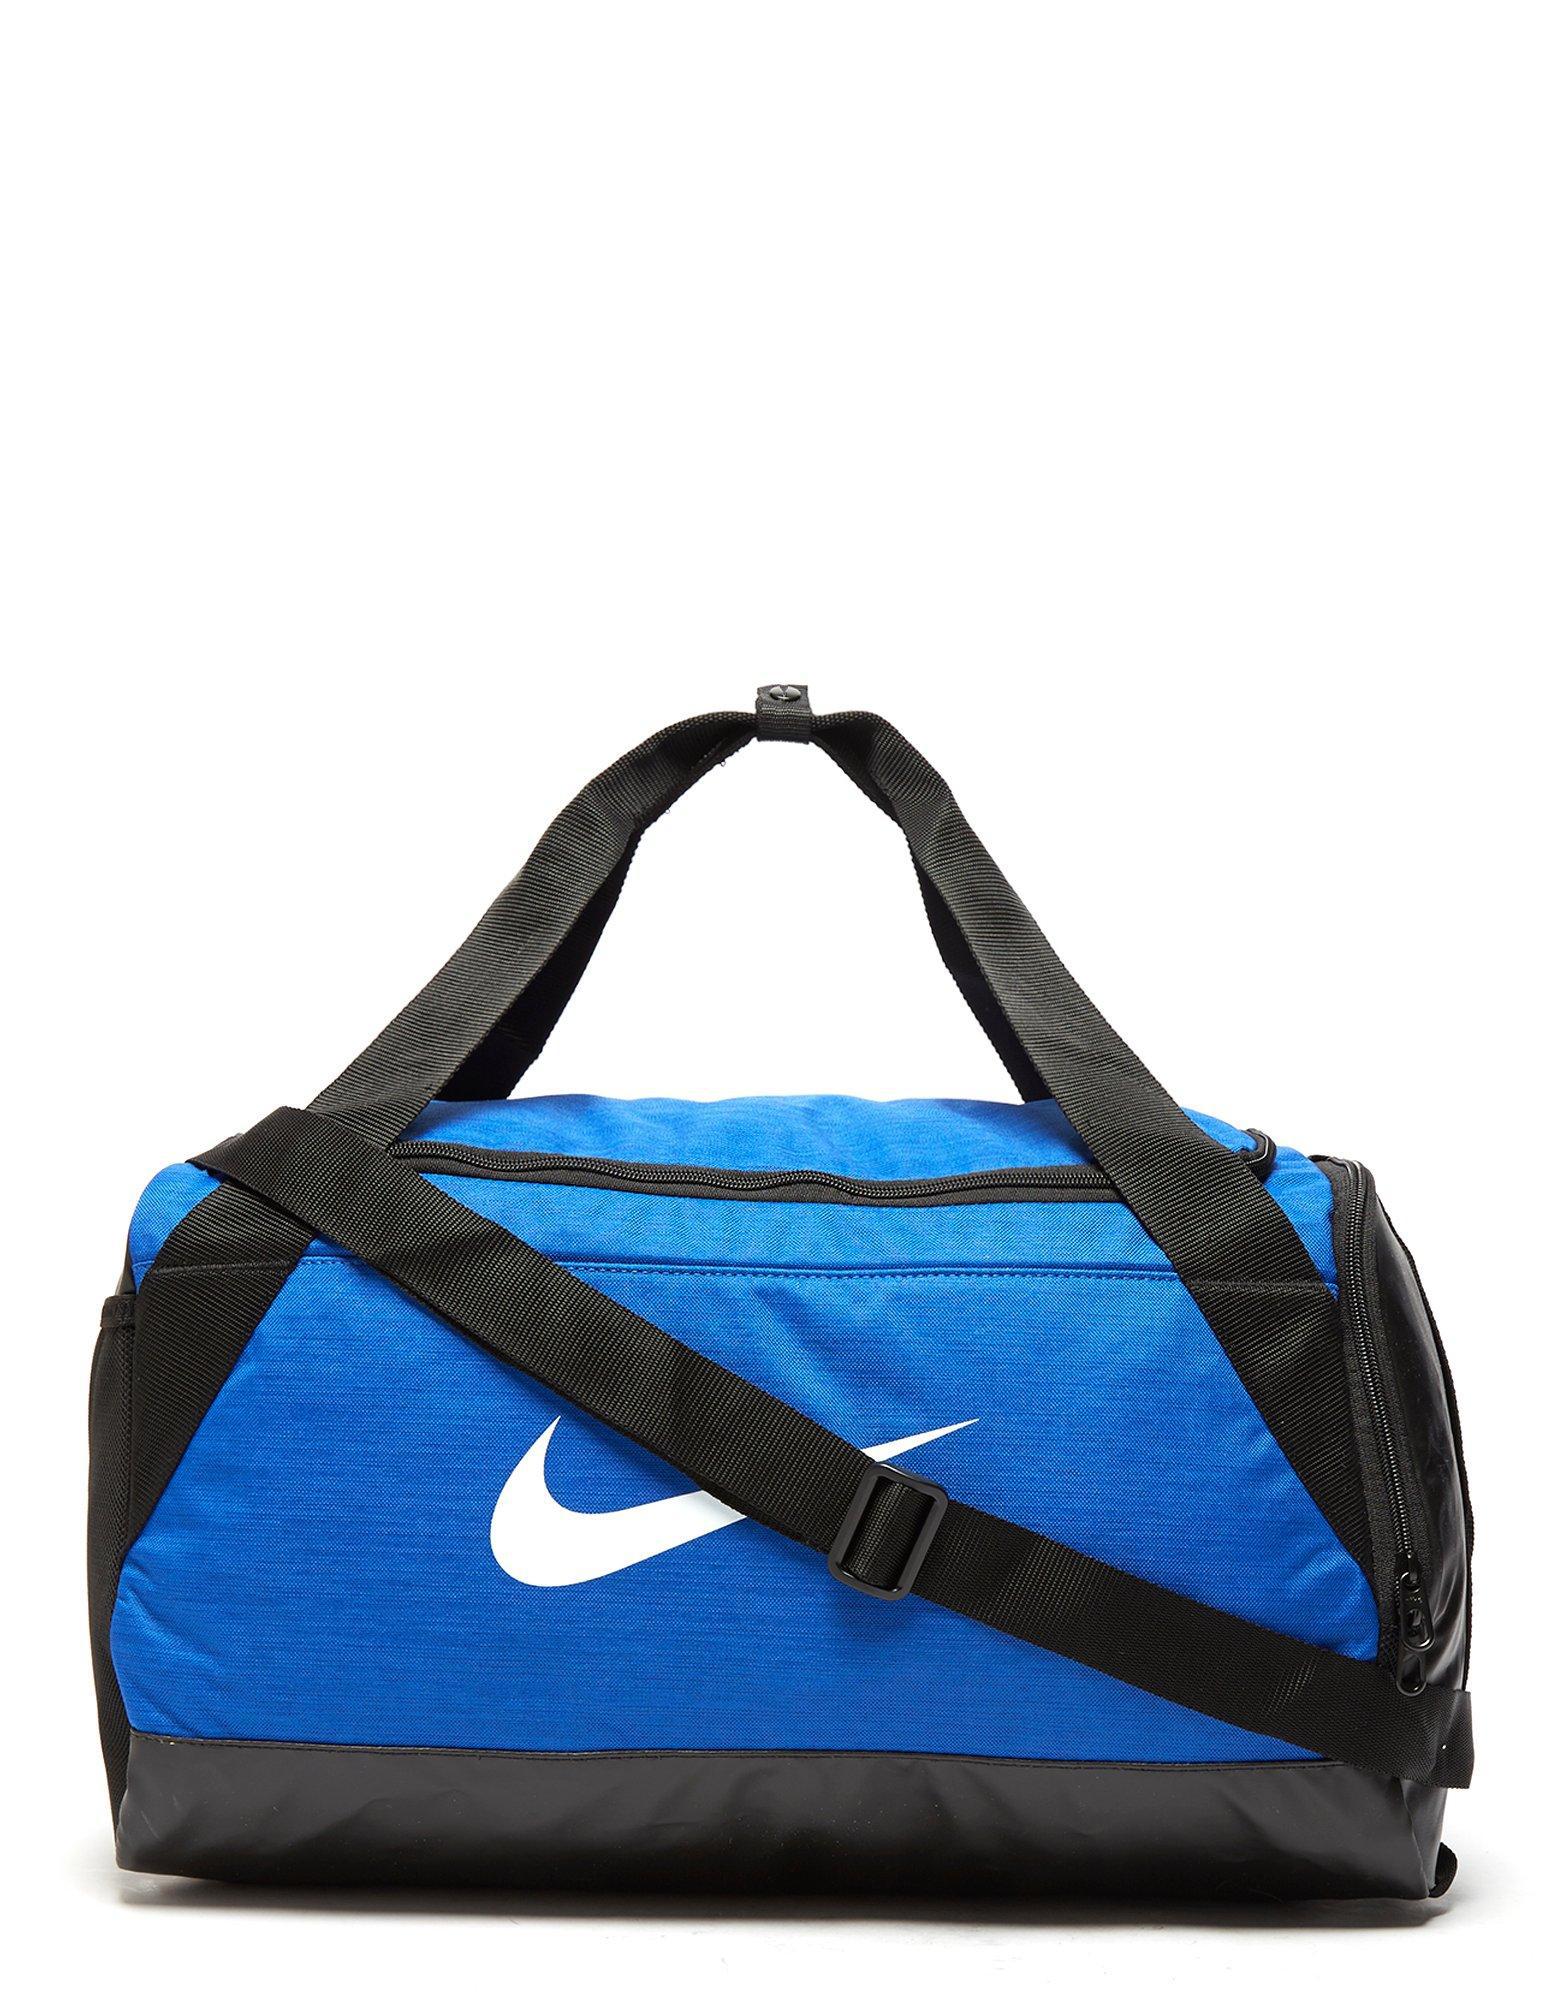 Nike Synthetic Brasilia Small Duffle Bag in Blue for Men - Lyst